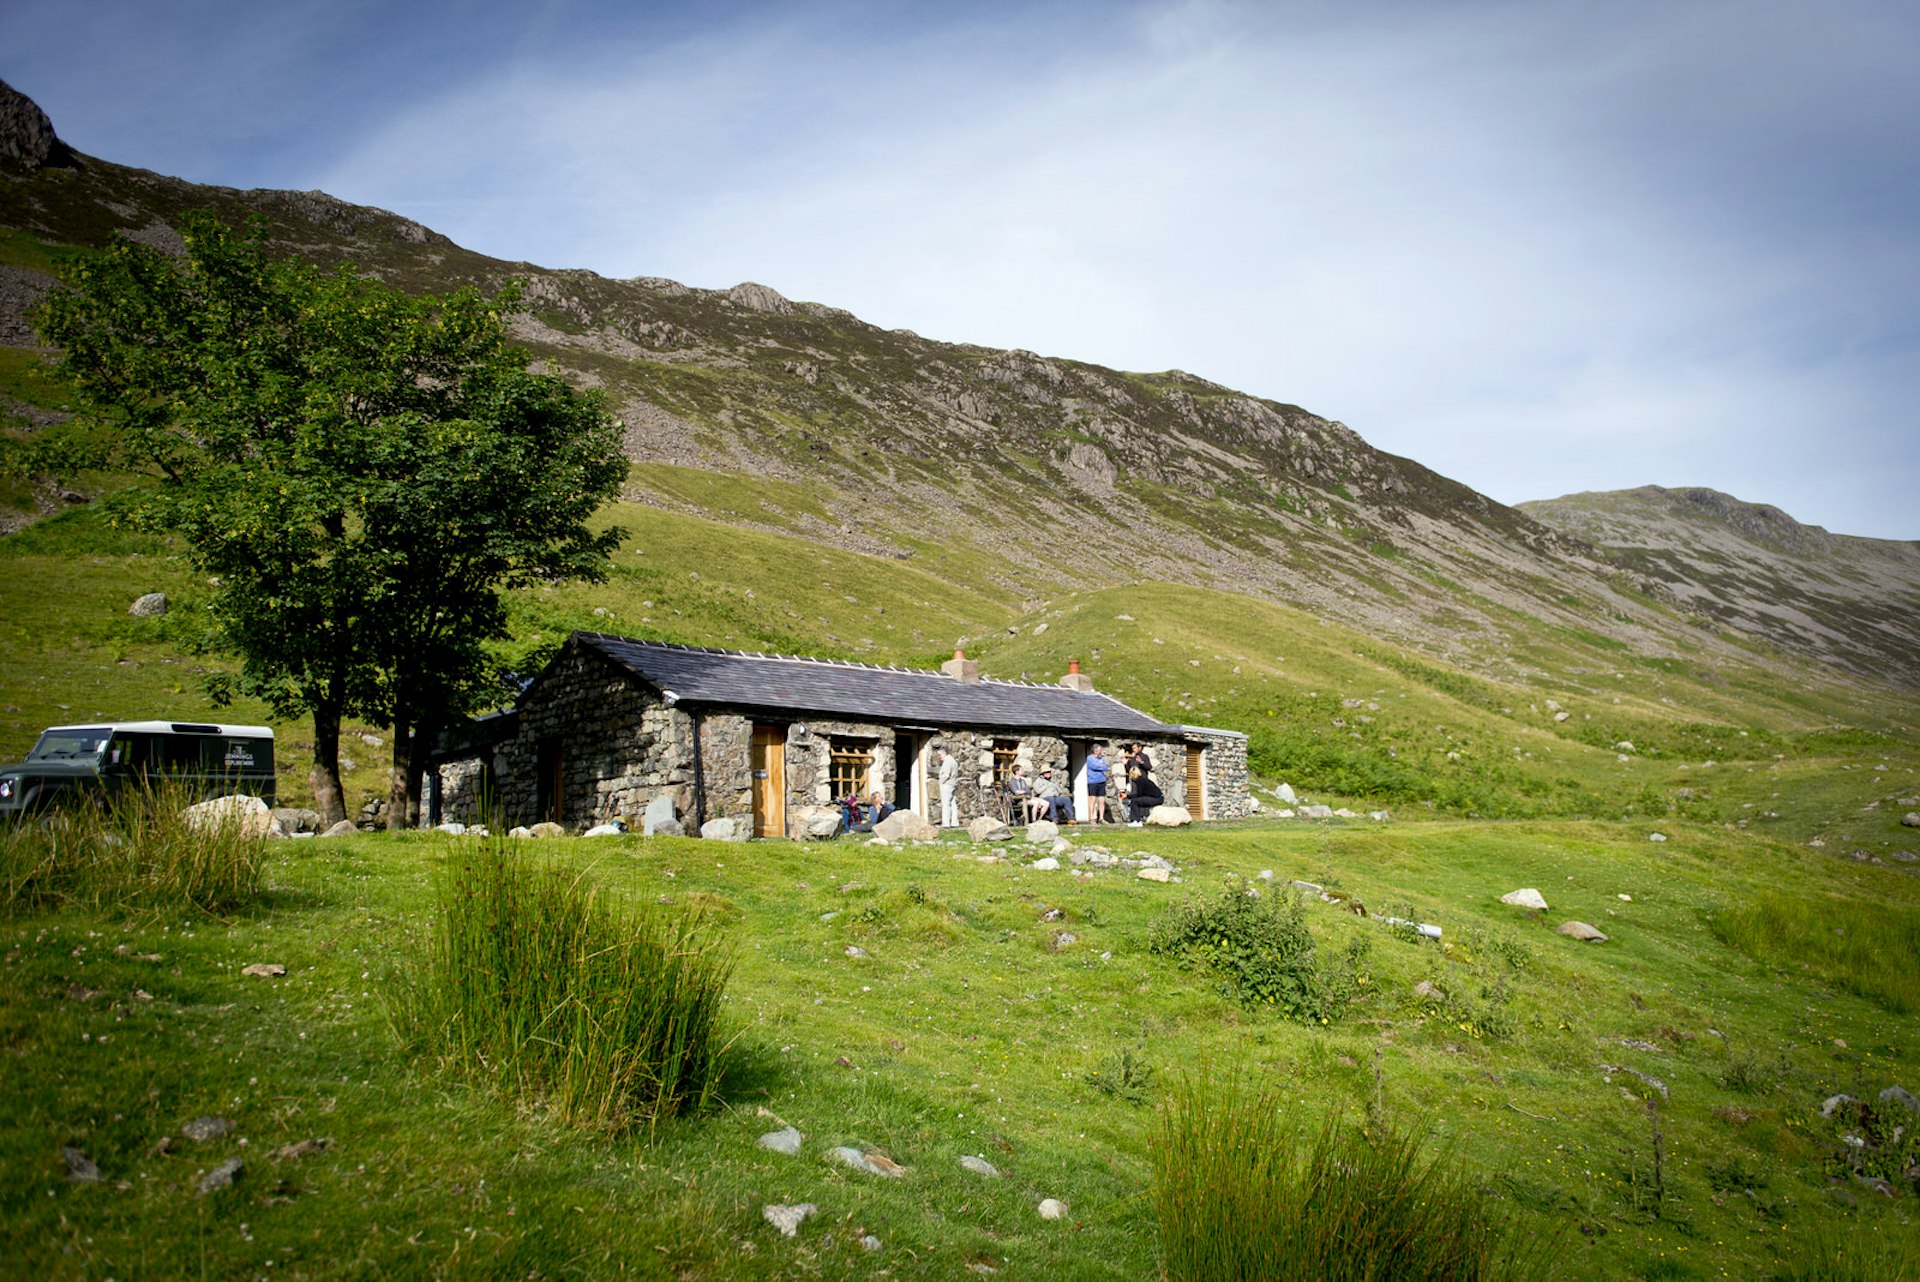 The YHA Black Sail hostel stands alone in a pristine Cumbrian Valley